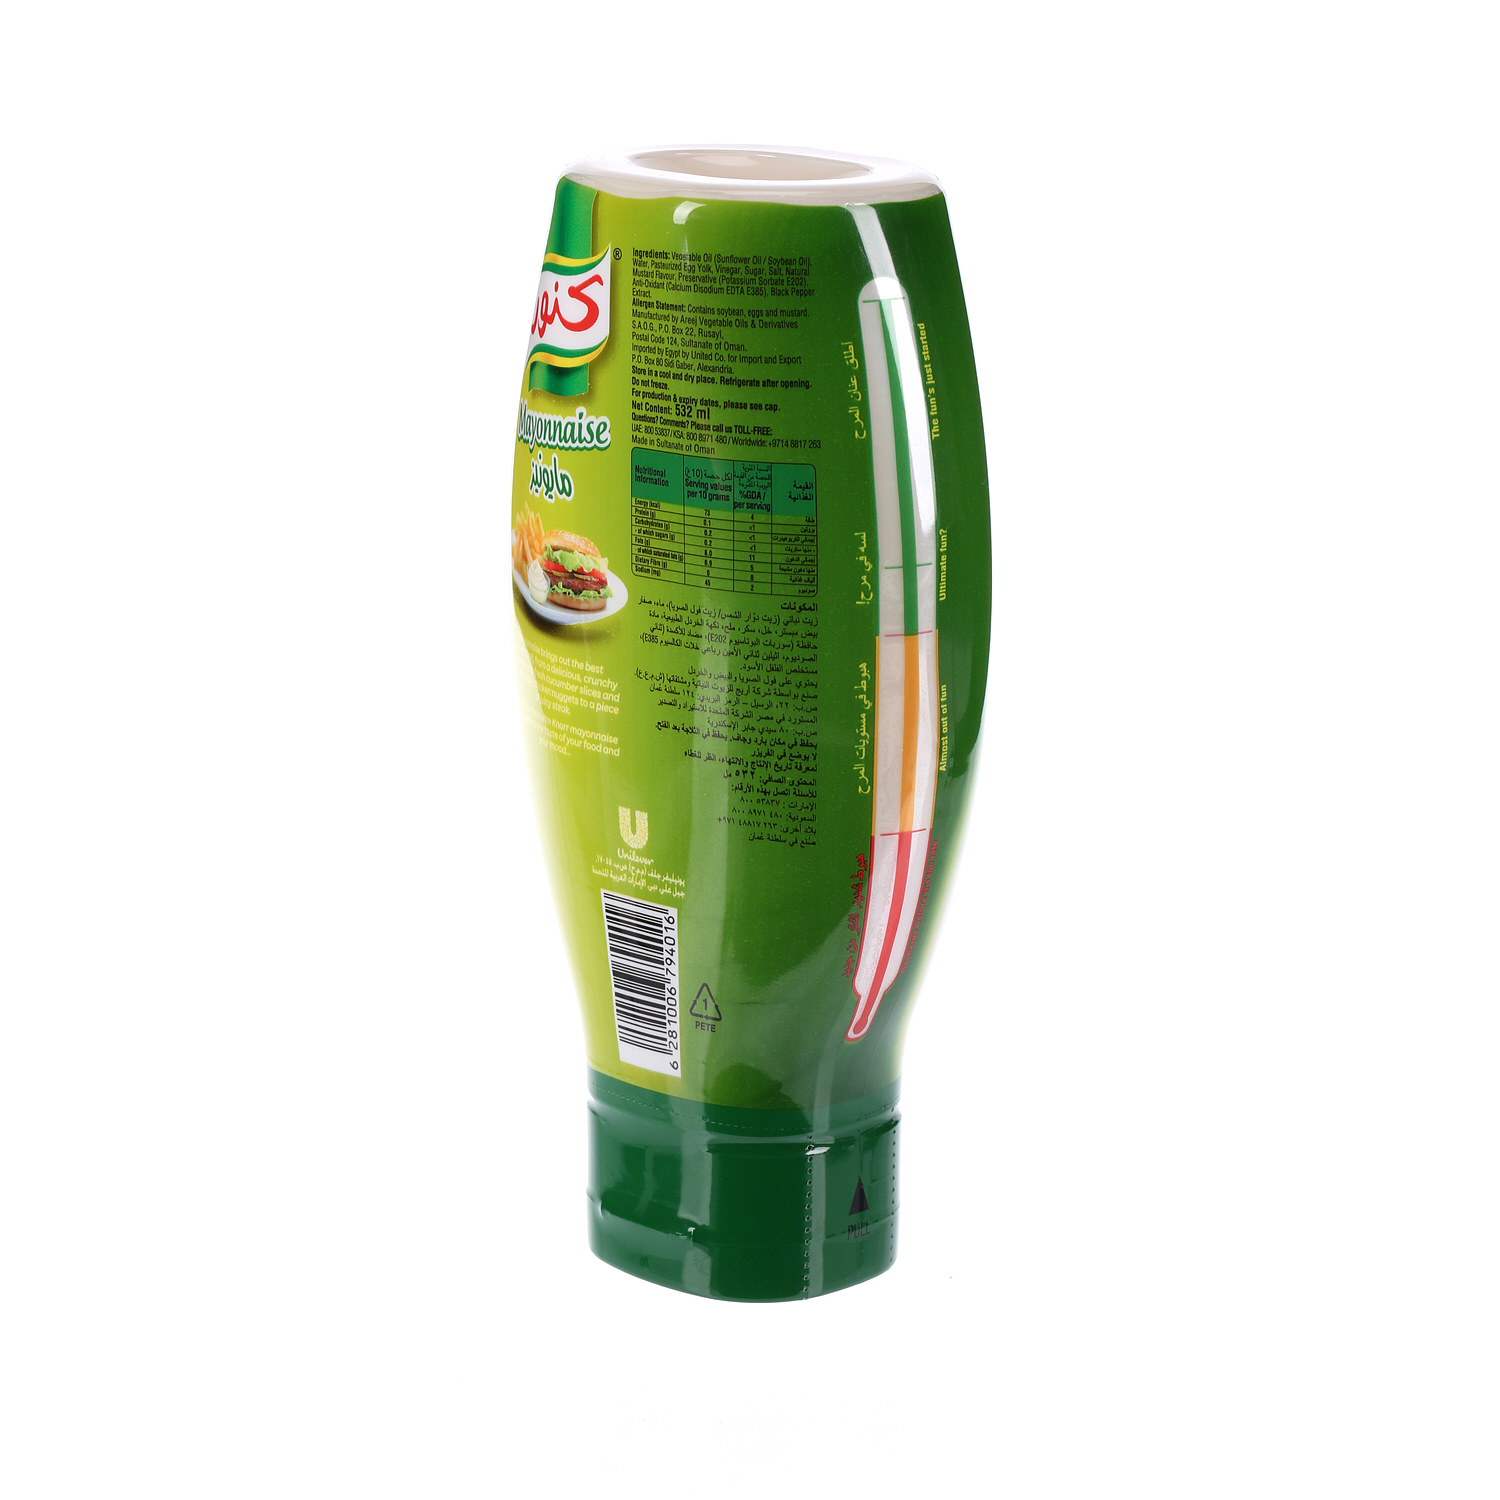 Knorr Real Mayo Plastic Bottle 532 ml